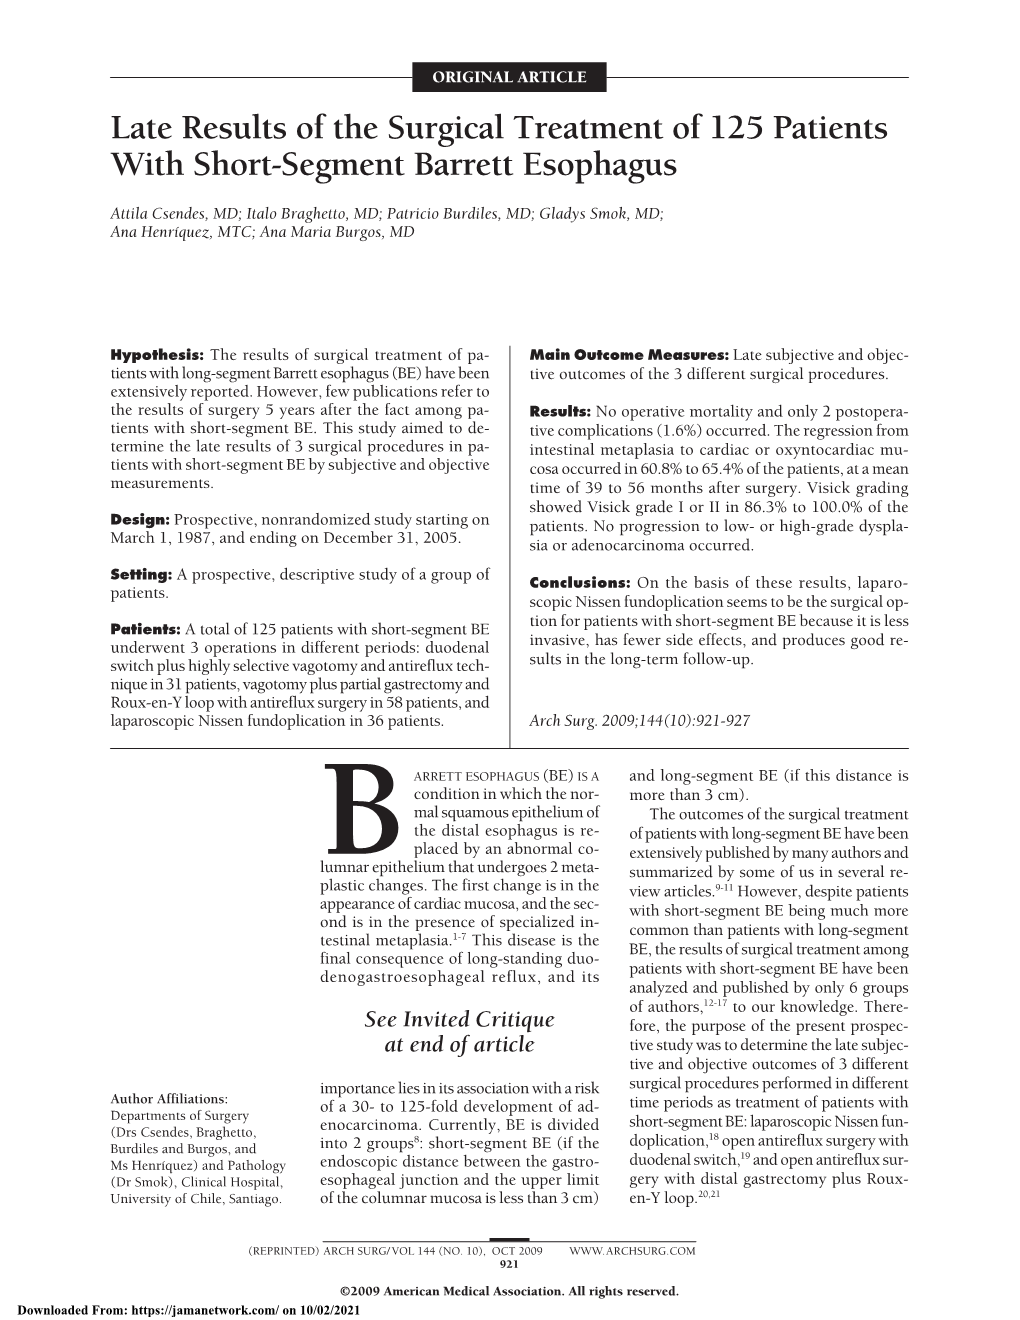 Late Results of the Surgical Treatment of 125 Patients with Short-Segment Barrett Esophagus